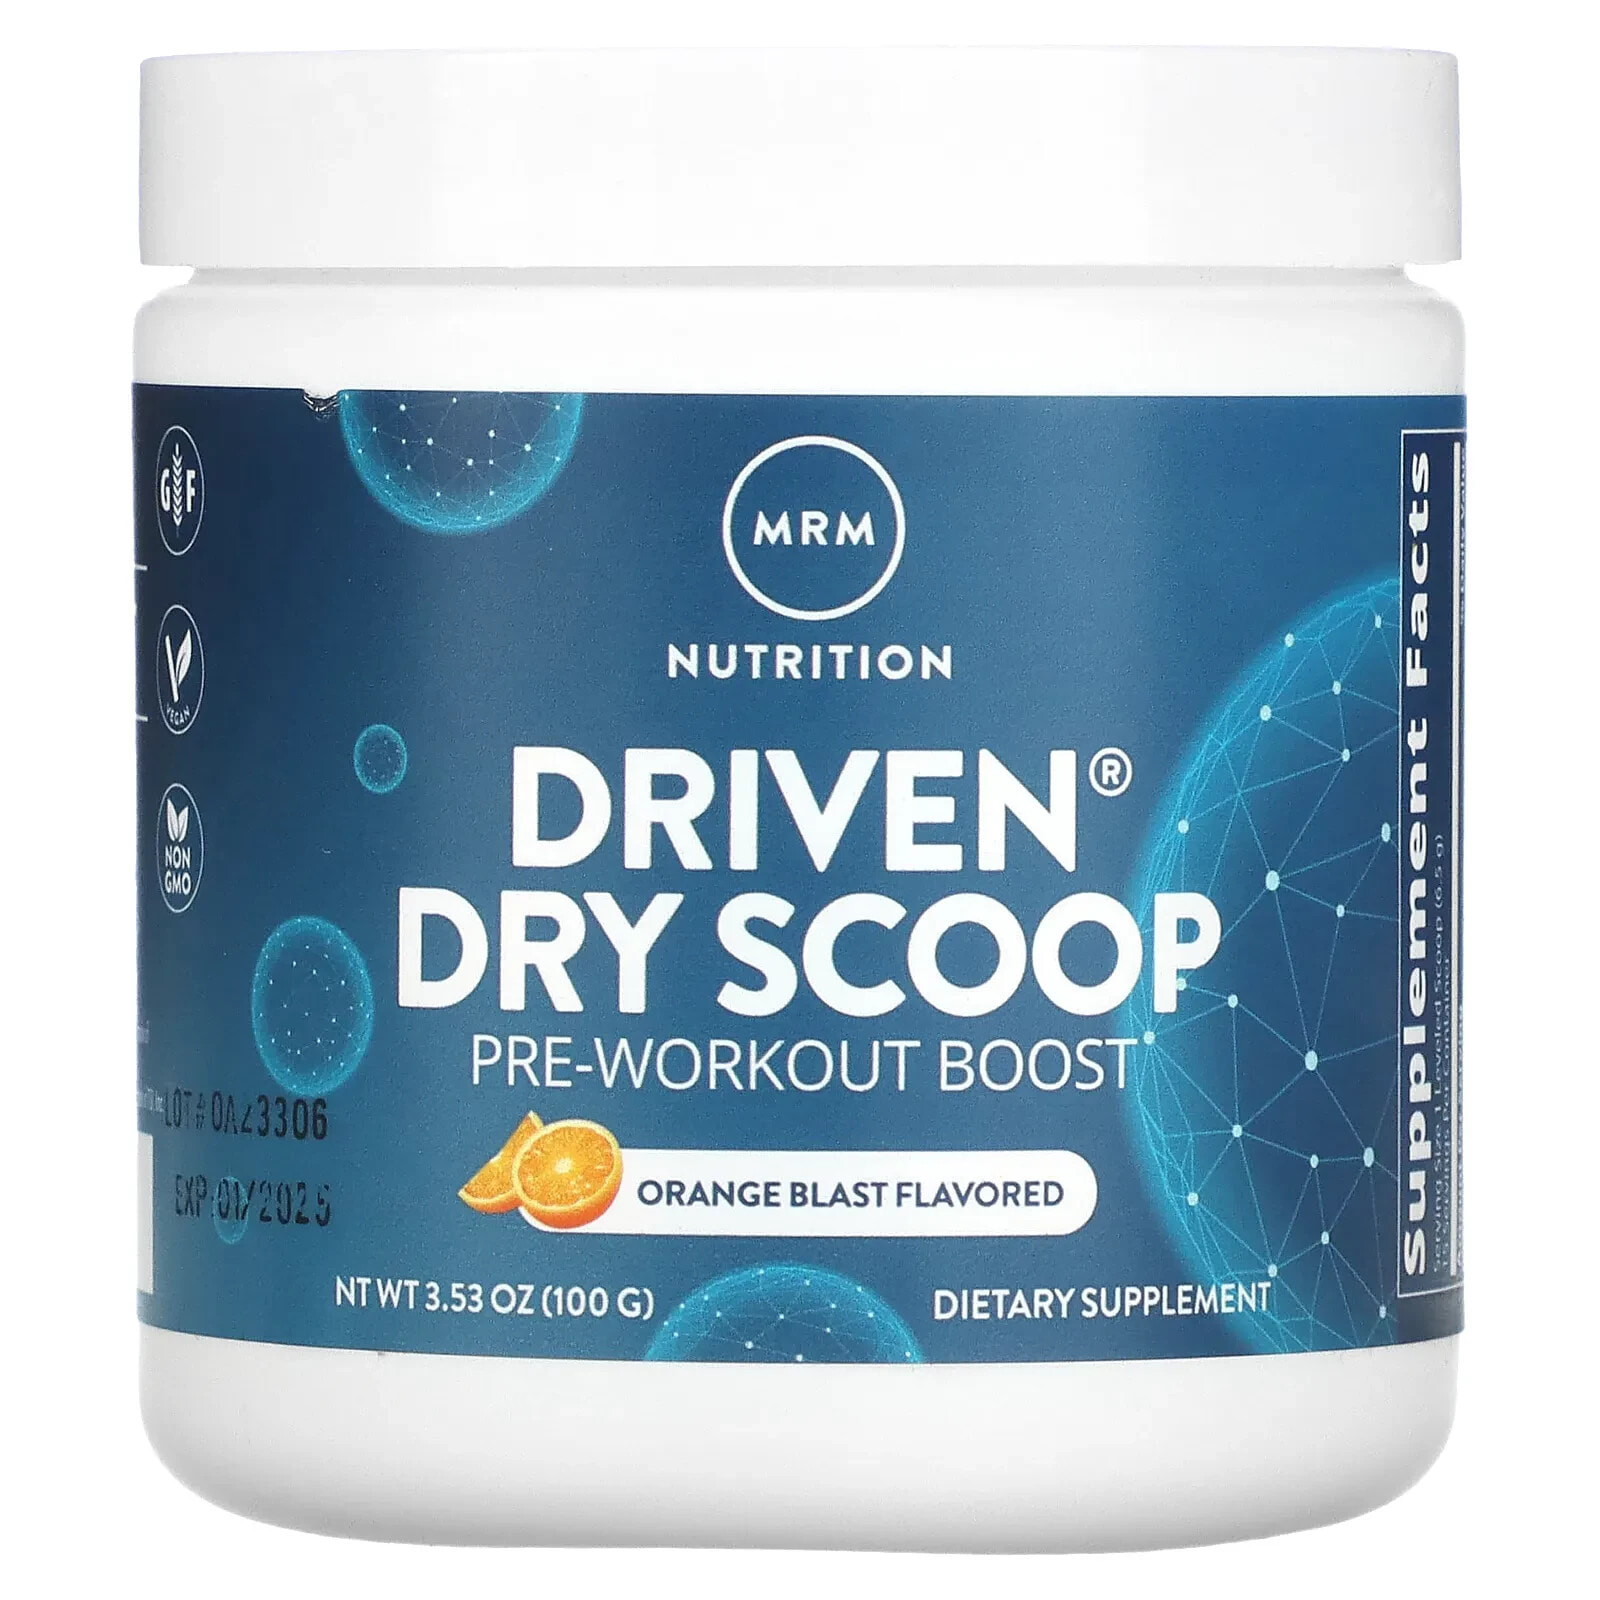 MRM Nutrition, Driven Dry Scoop, Pre-Workout Boost, Sour Berry, 3.53 oz (100 g)